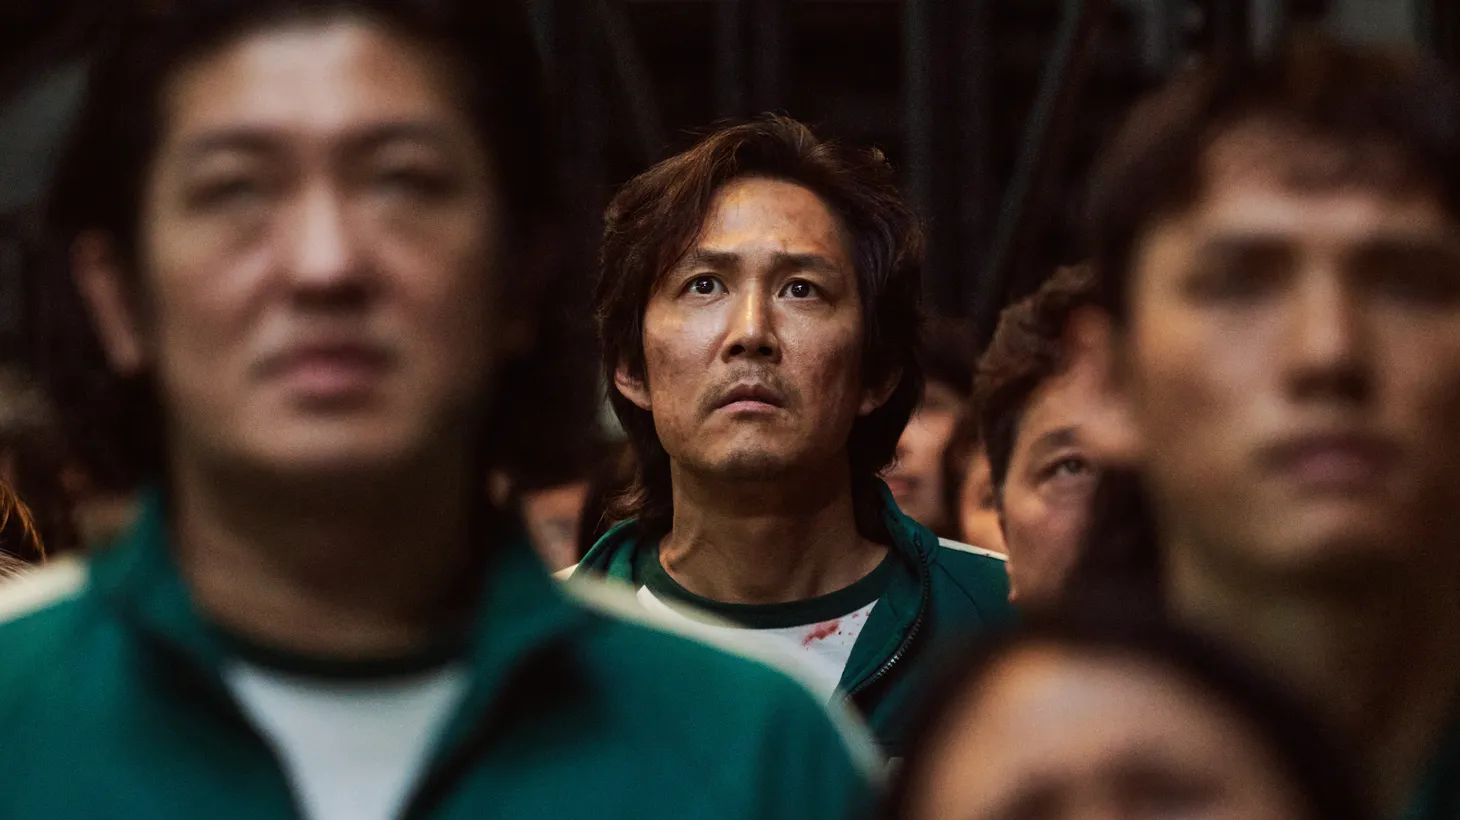 Actor Lee Jung-jae plays Seong Gi-hun, a.k.a. Player 456, in the Netflix hit show “Squid Game.” On his global fame and success, he says, “Wherever I go, people will come to me, and they recognize me. I'm just really joyful.”